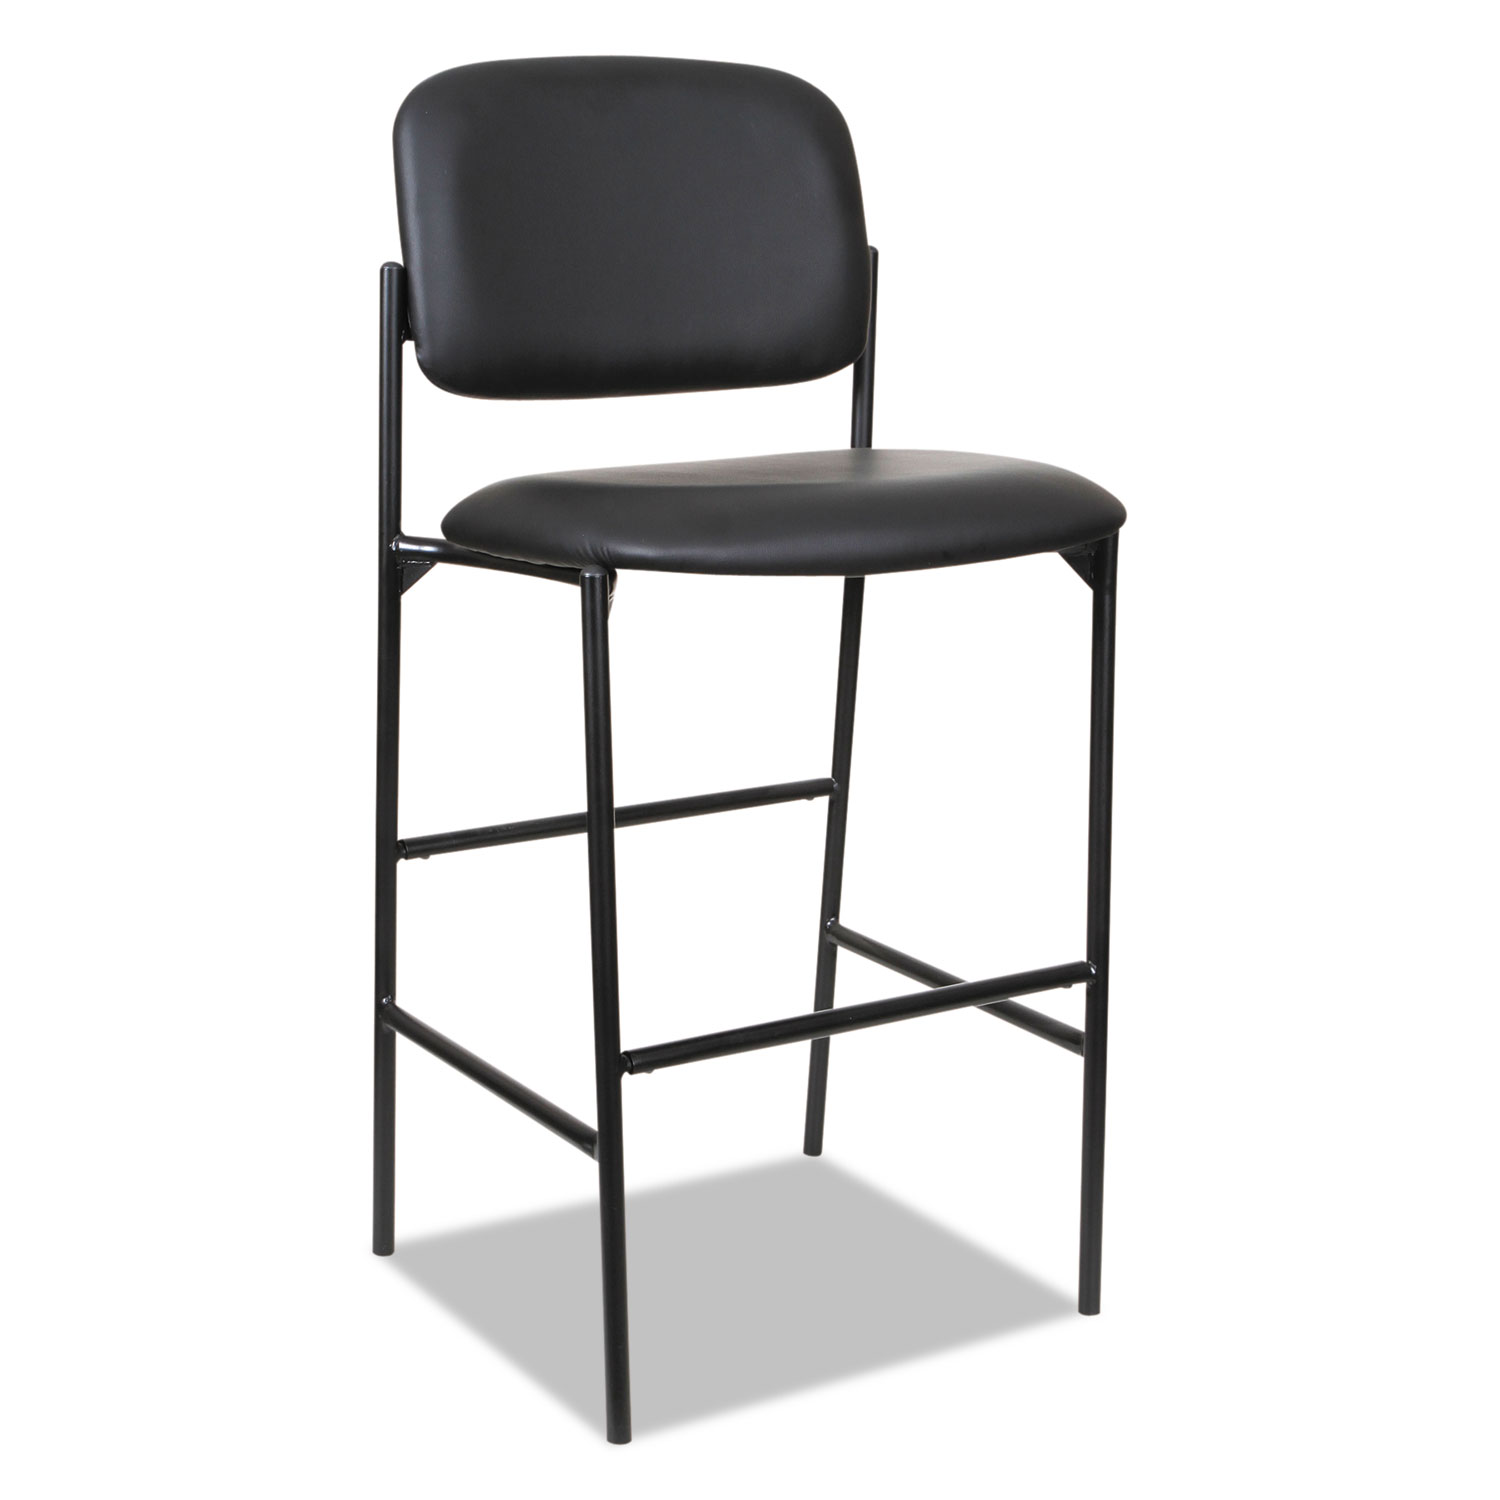 Sorrento Series Stool, Black, Faux Leathe, without Arms